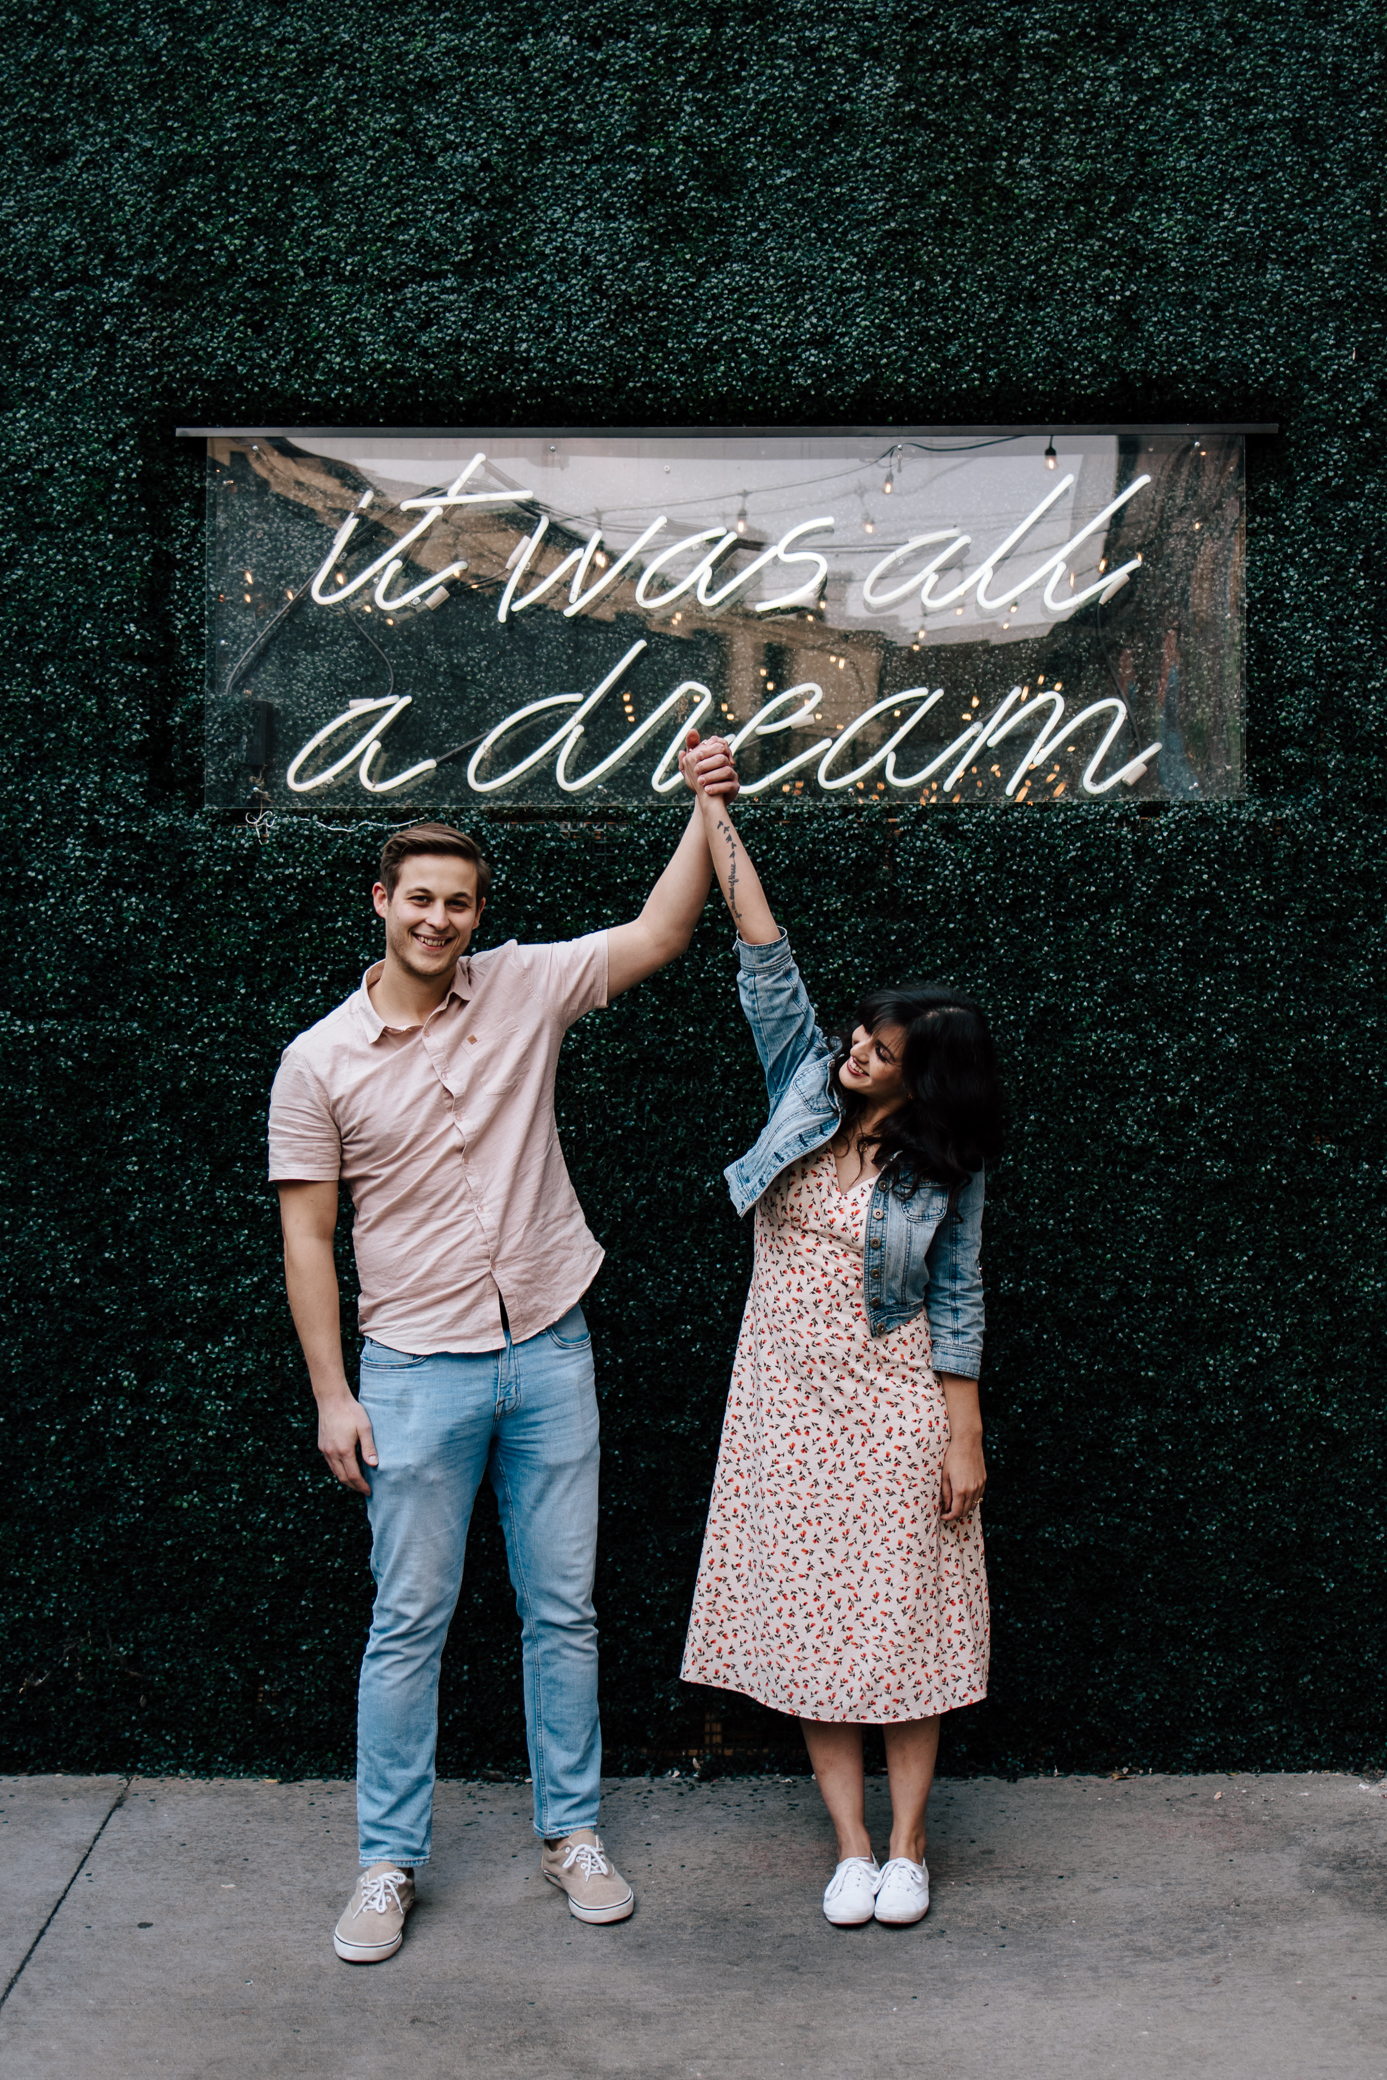 A man and woman stand under a sign attached to a greenery wall that reads "it was all a dream." The man is holding the woman's hand up in the air, as if she won first place in a competition.